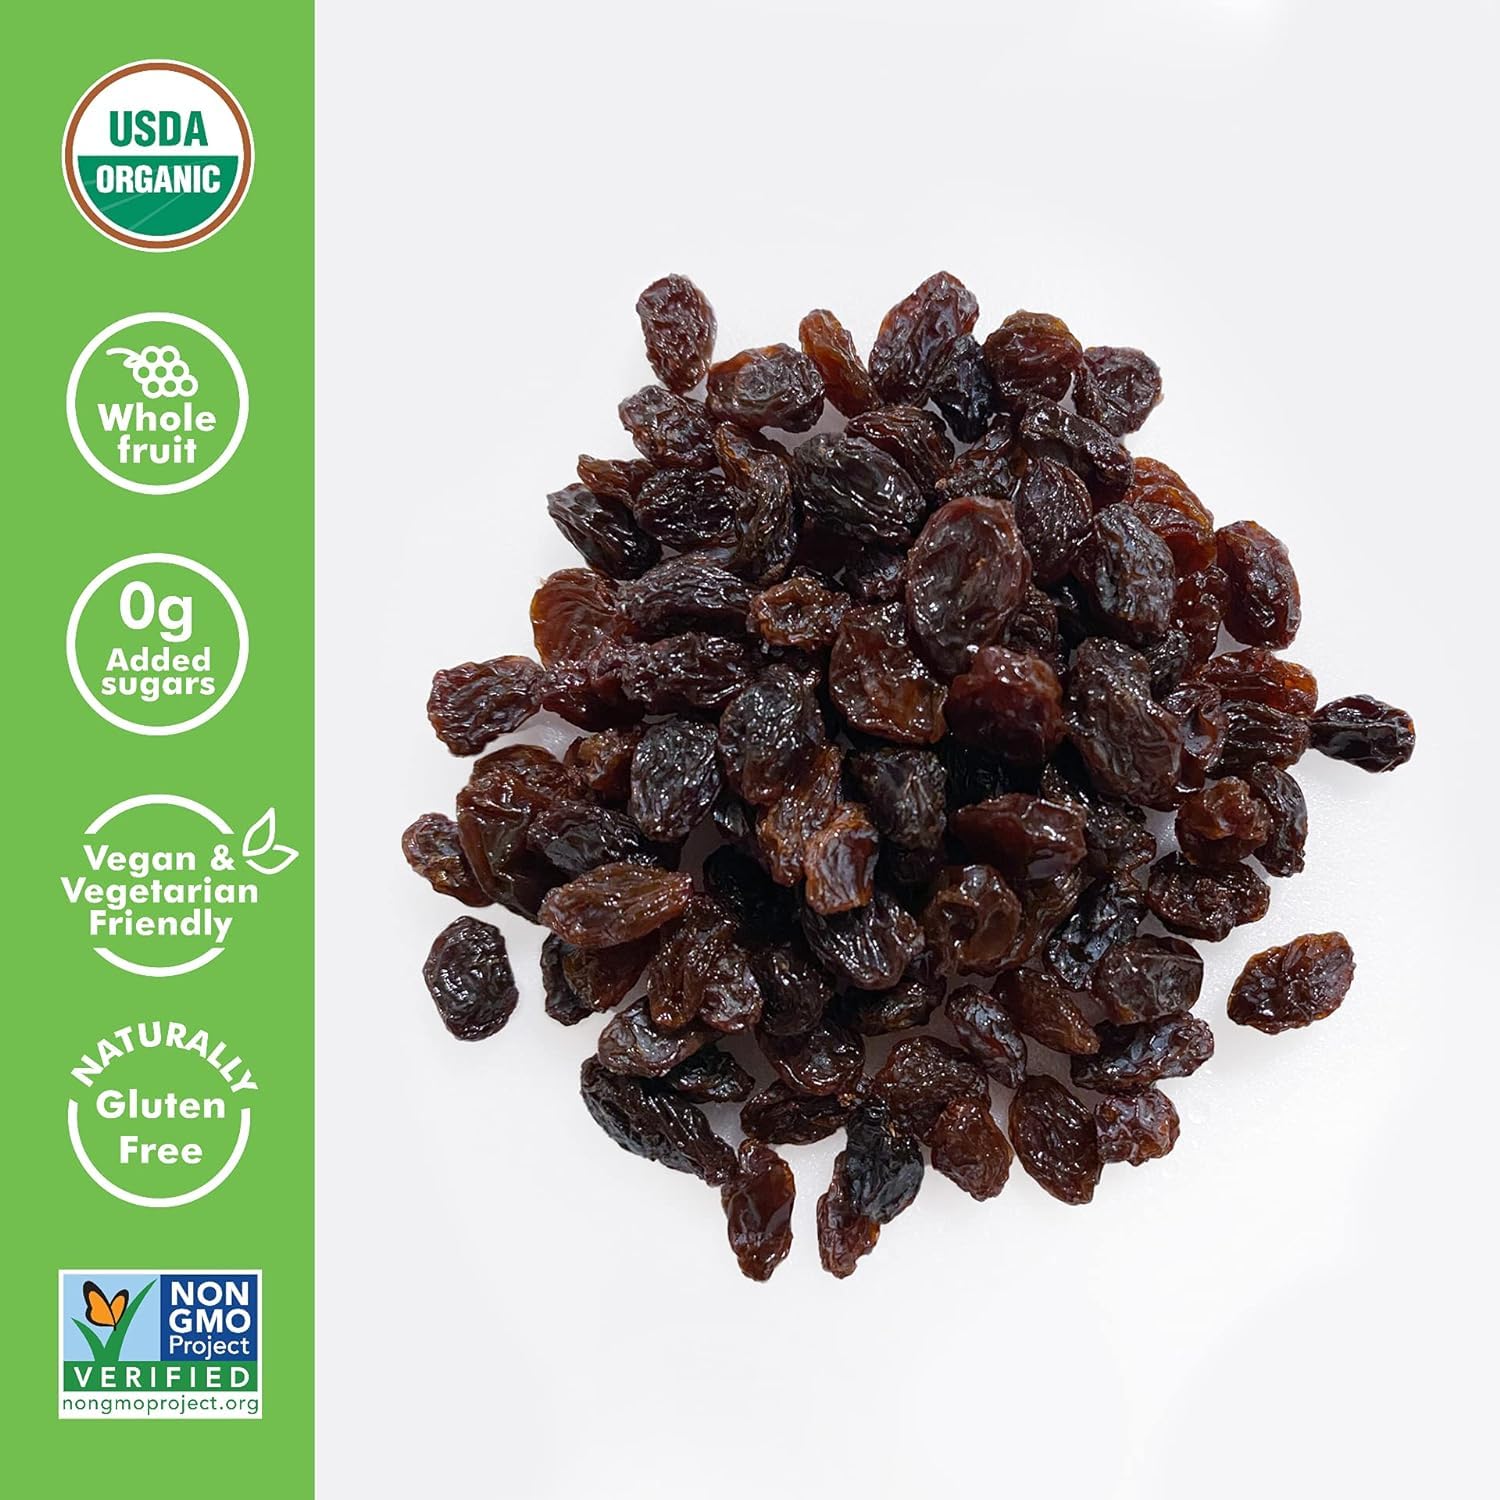 Sun-Maid Organic California Sun-Dried Raisins - (72 Pack) 1 oz Snack-Size Box - Organic Dried Fruit Snack for Lunches, Snacks, and Natural Sweeteners : Raisins Produce : Everything Else